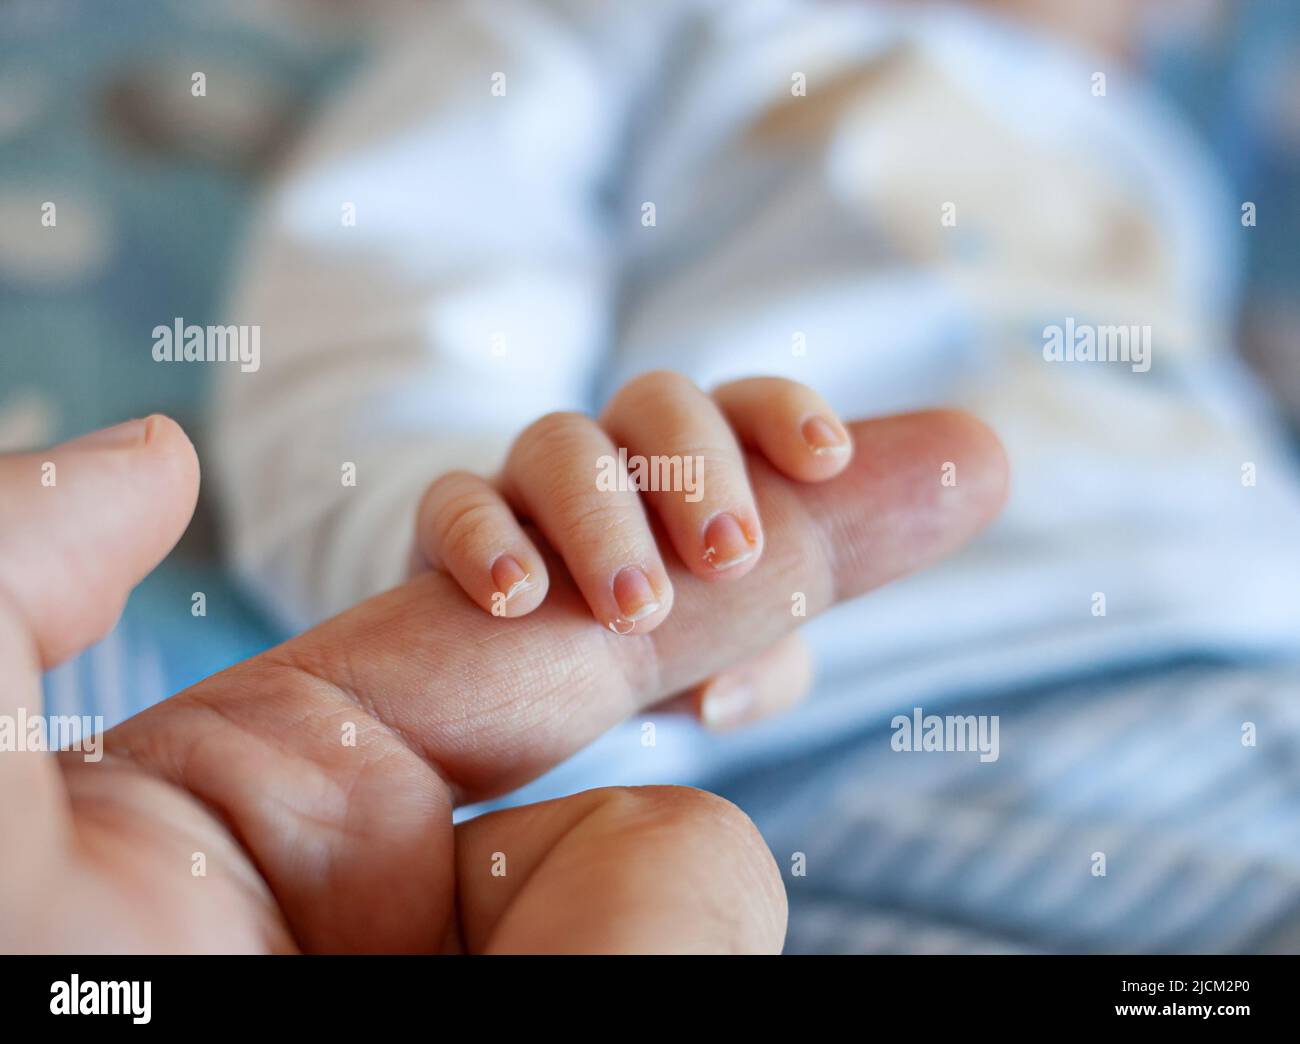 Detail of the fingers of a newborn, especially the nails. Newborn babies have long, sharp nails full of nerve endings. Stock Photo